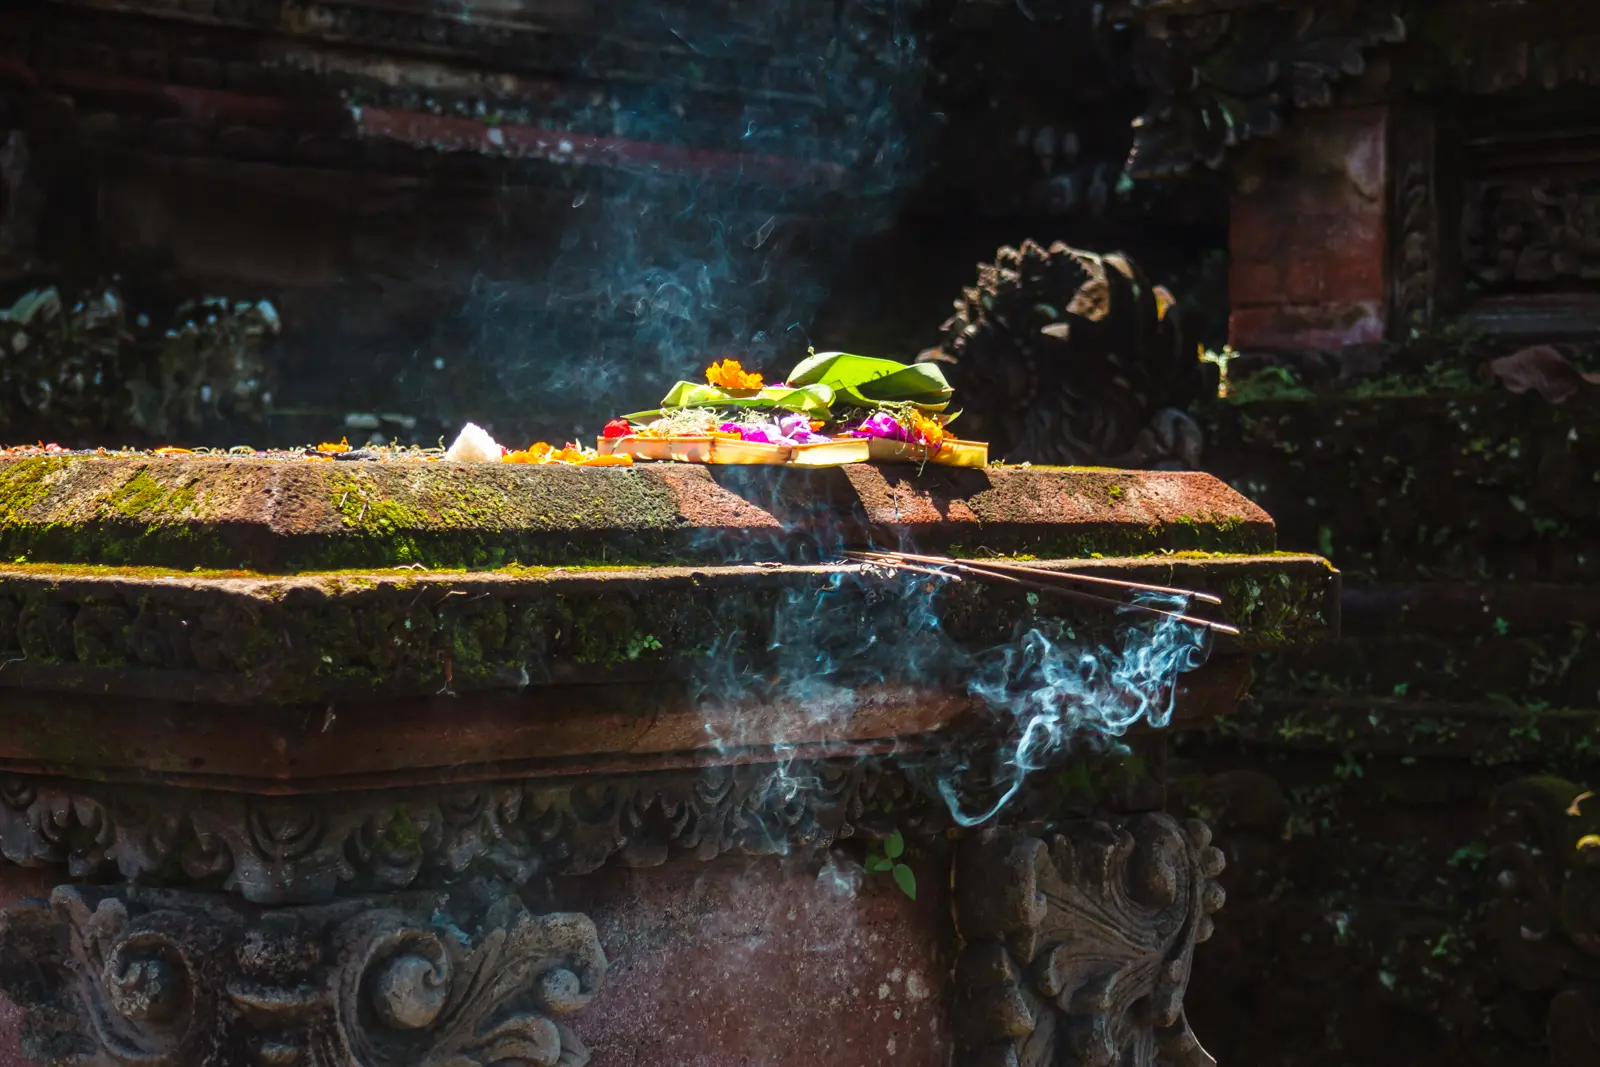 Close up of Balinese offering with flowers and incense in a basket on an ornate stone table in a temple, things to know before going to Bali.